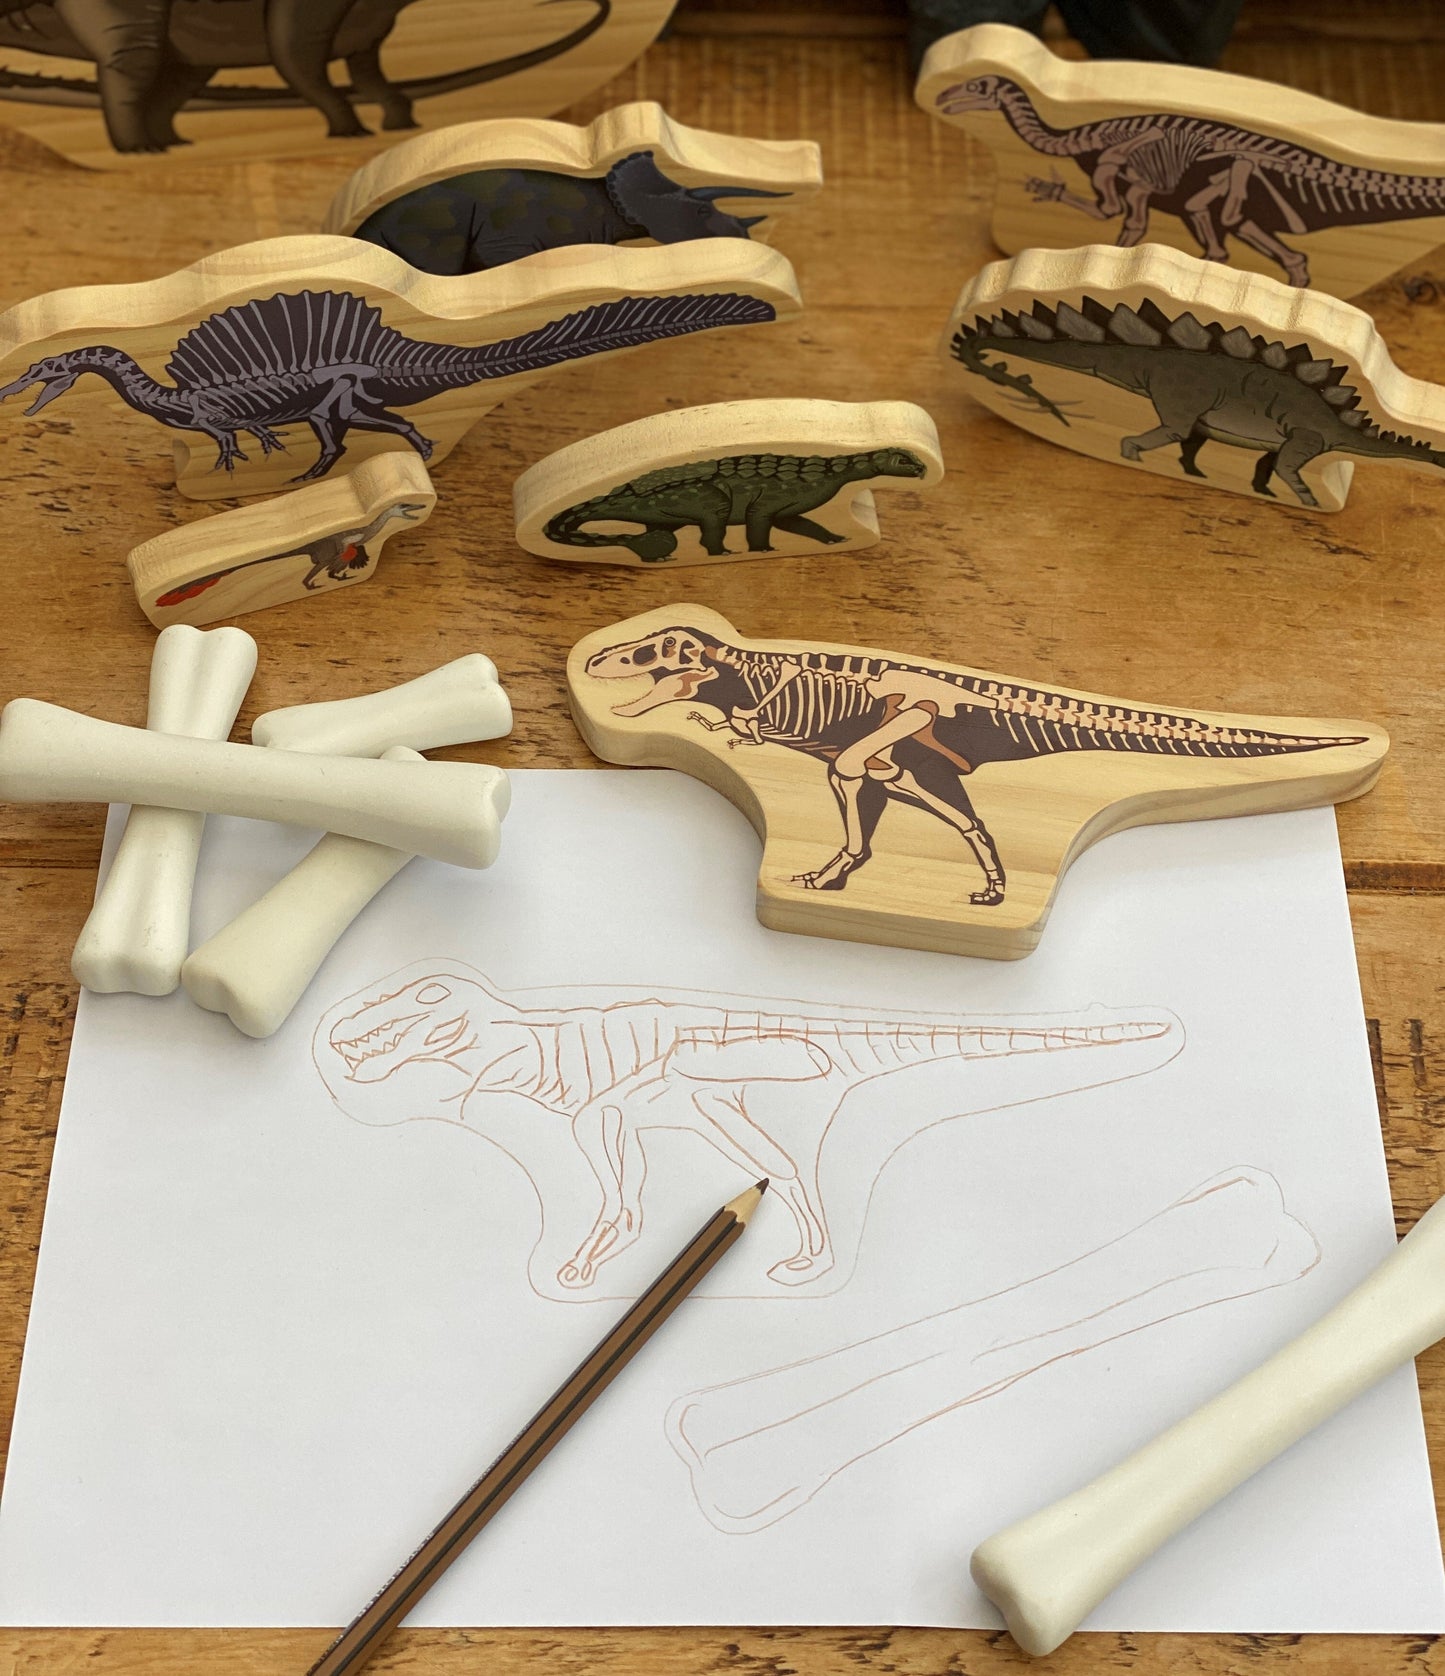 Dinosaurs Wooden Characters great for small world play.